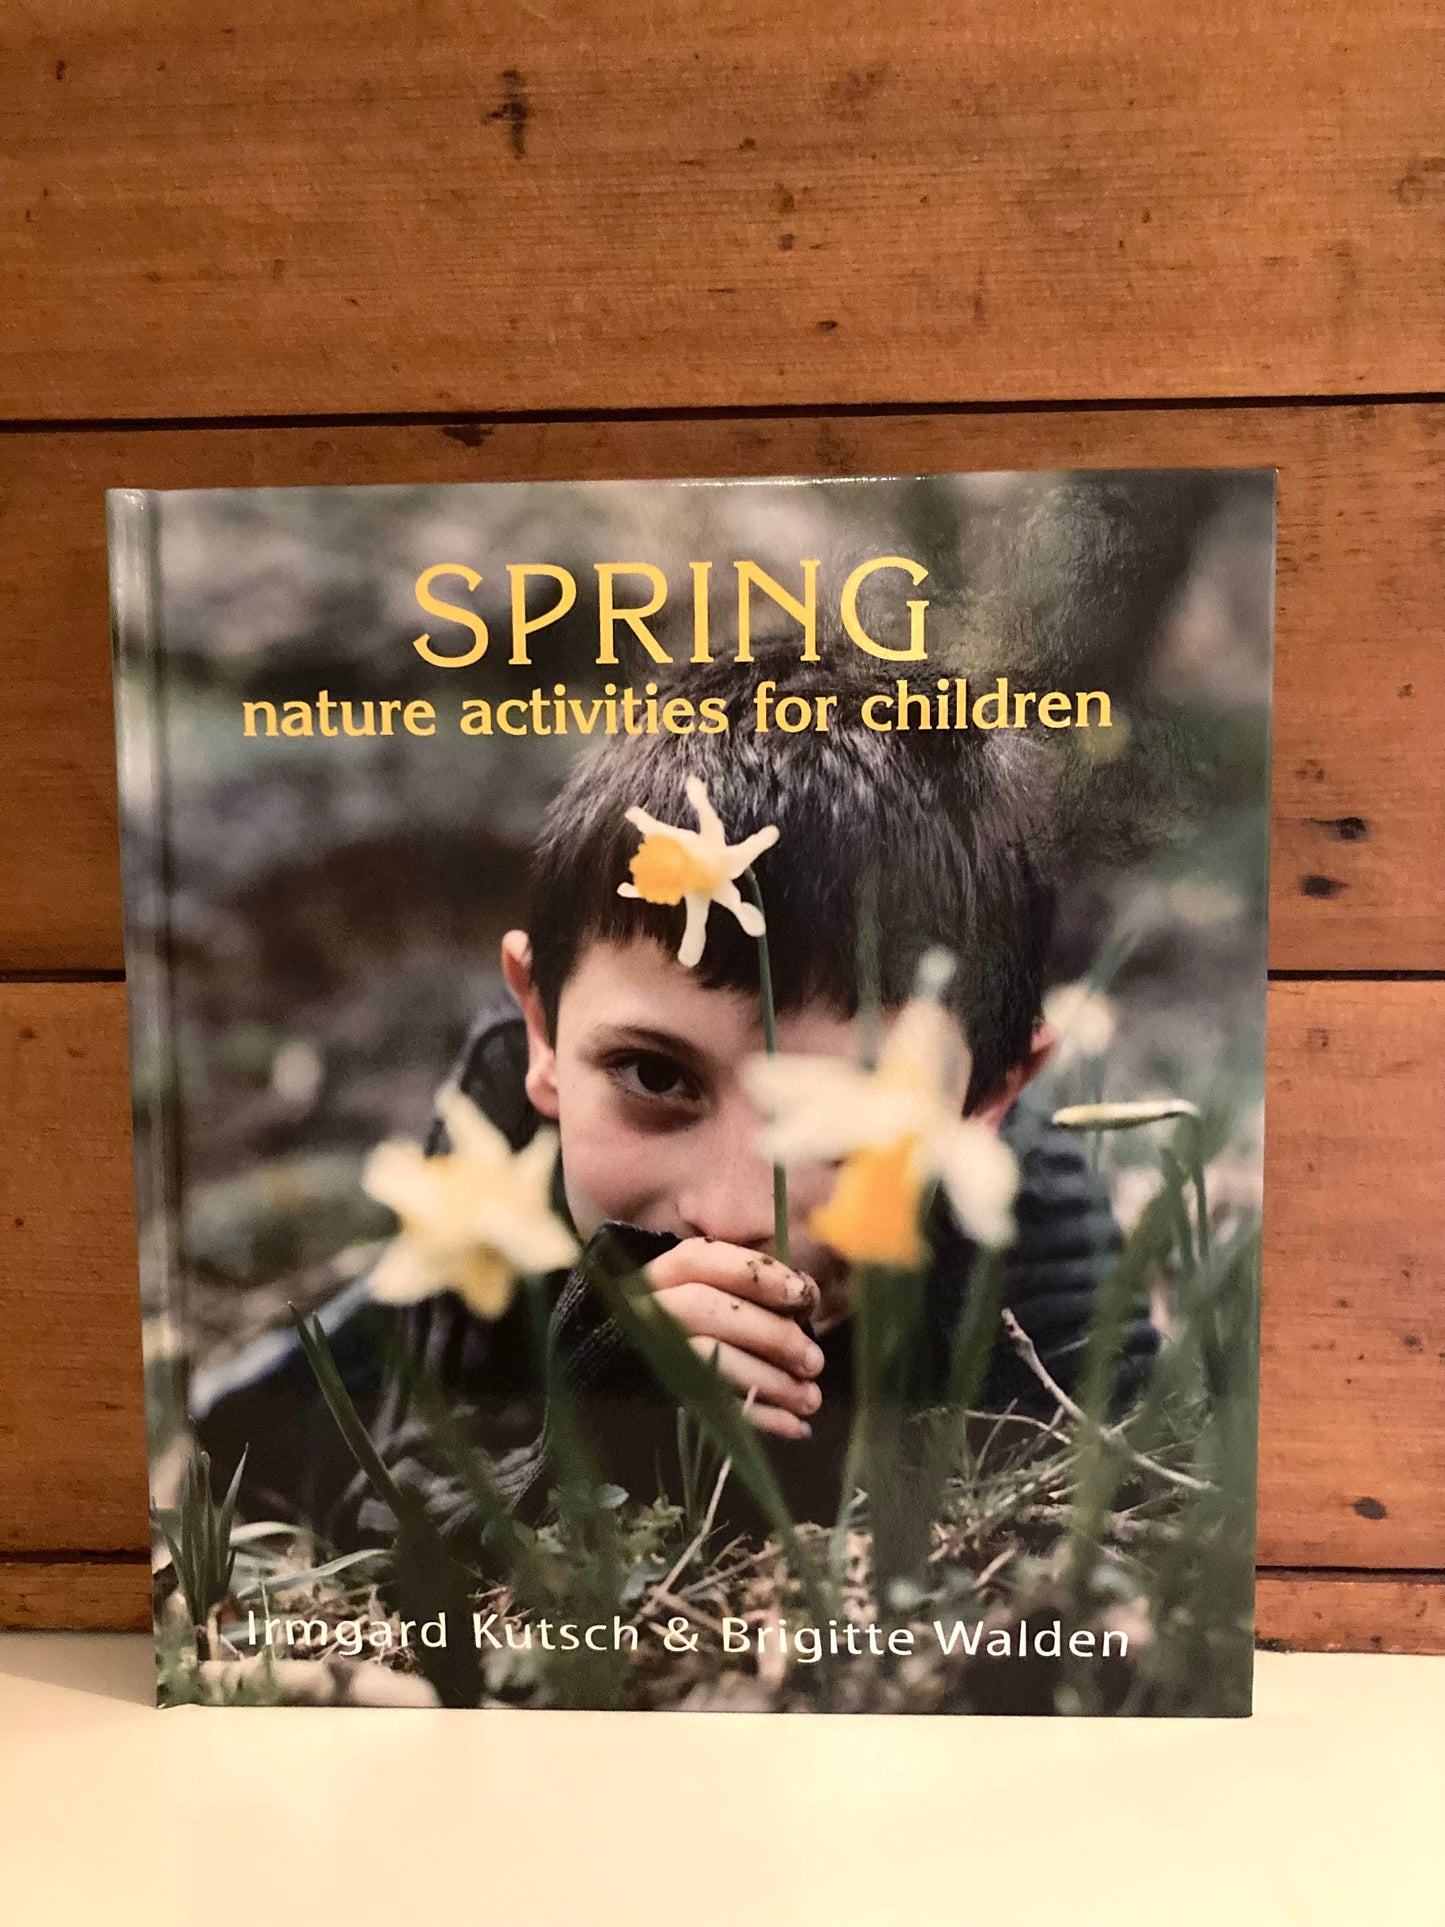 Parenting Resource Book - SUMMER AND SPRING NATURE ACTIVITIES